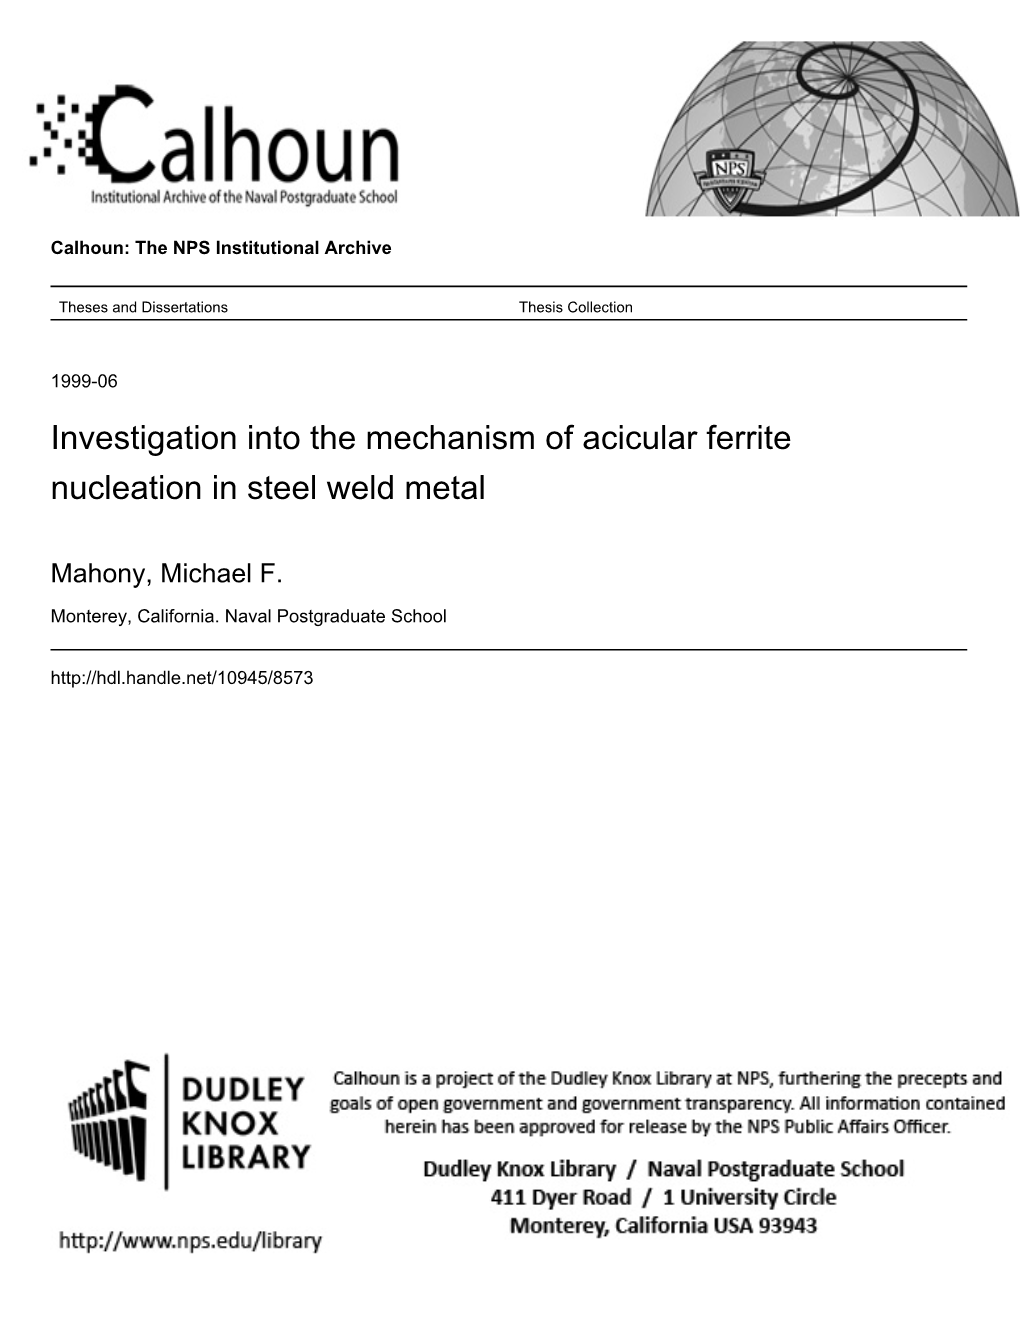 Investigation Into the Mechanism of Acicular Ferrite Nucleation in Steel Weld Metal